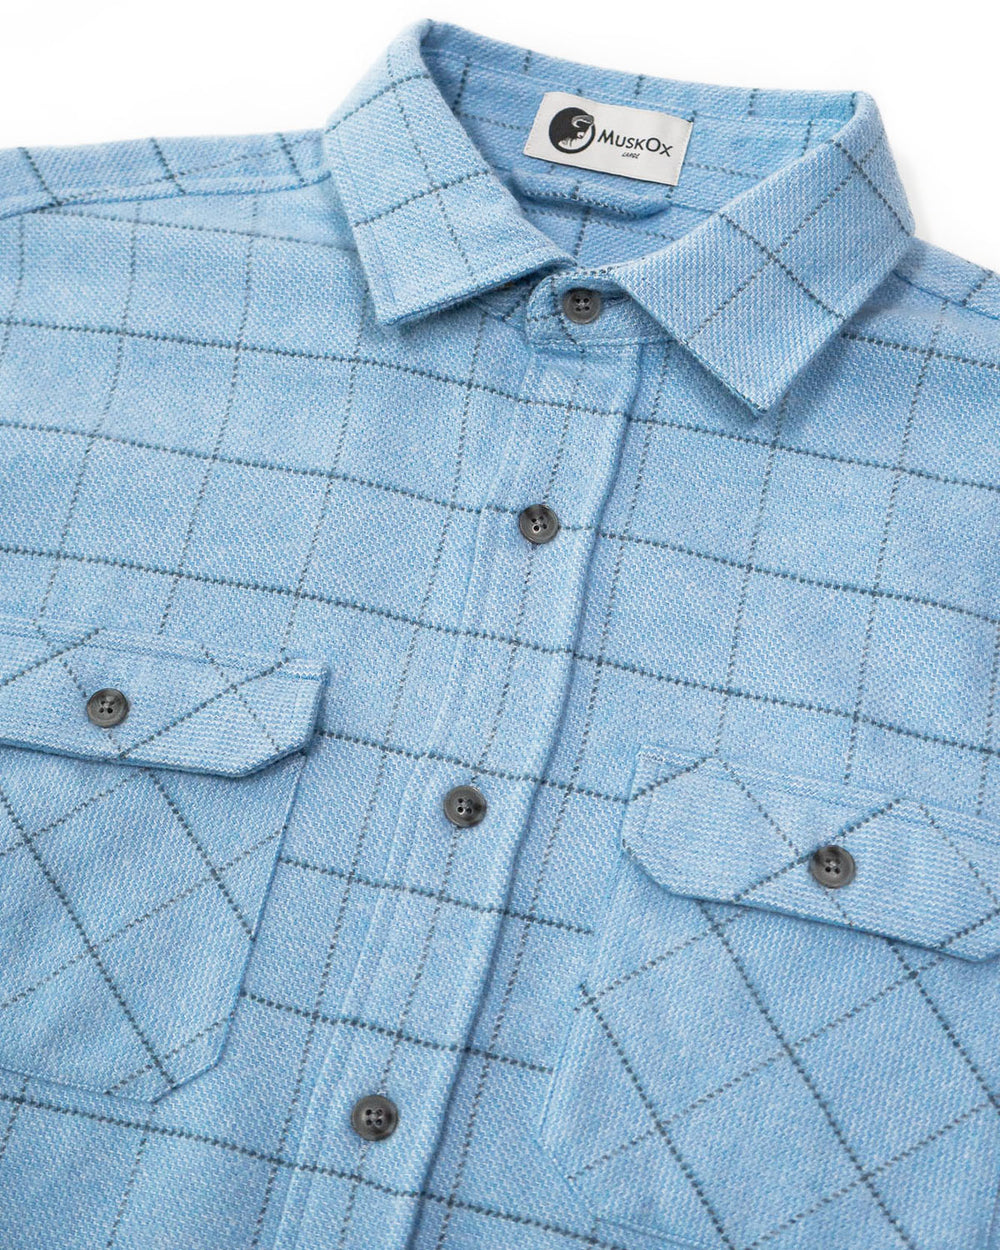 Grand Flannel Shirt for Men in Glacier Blue by MuskOx Flannels